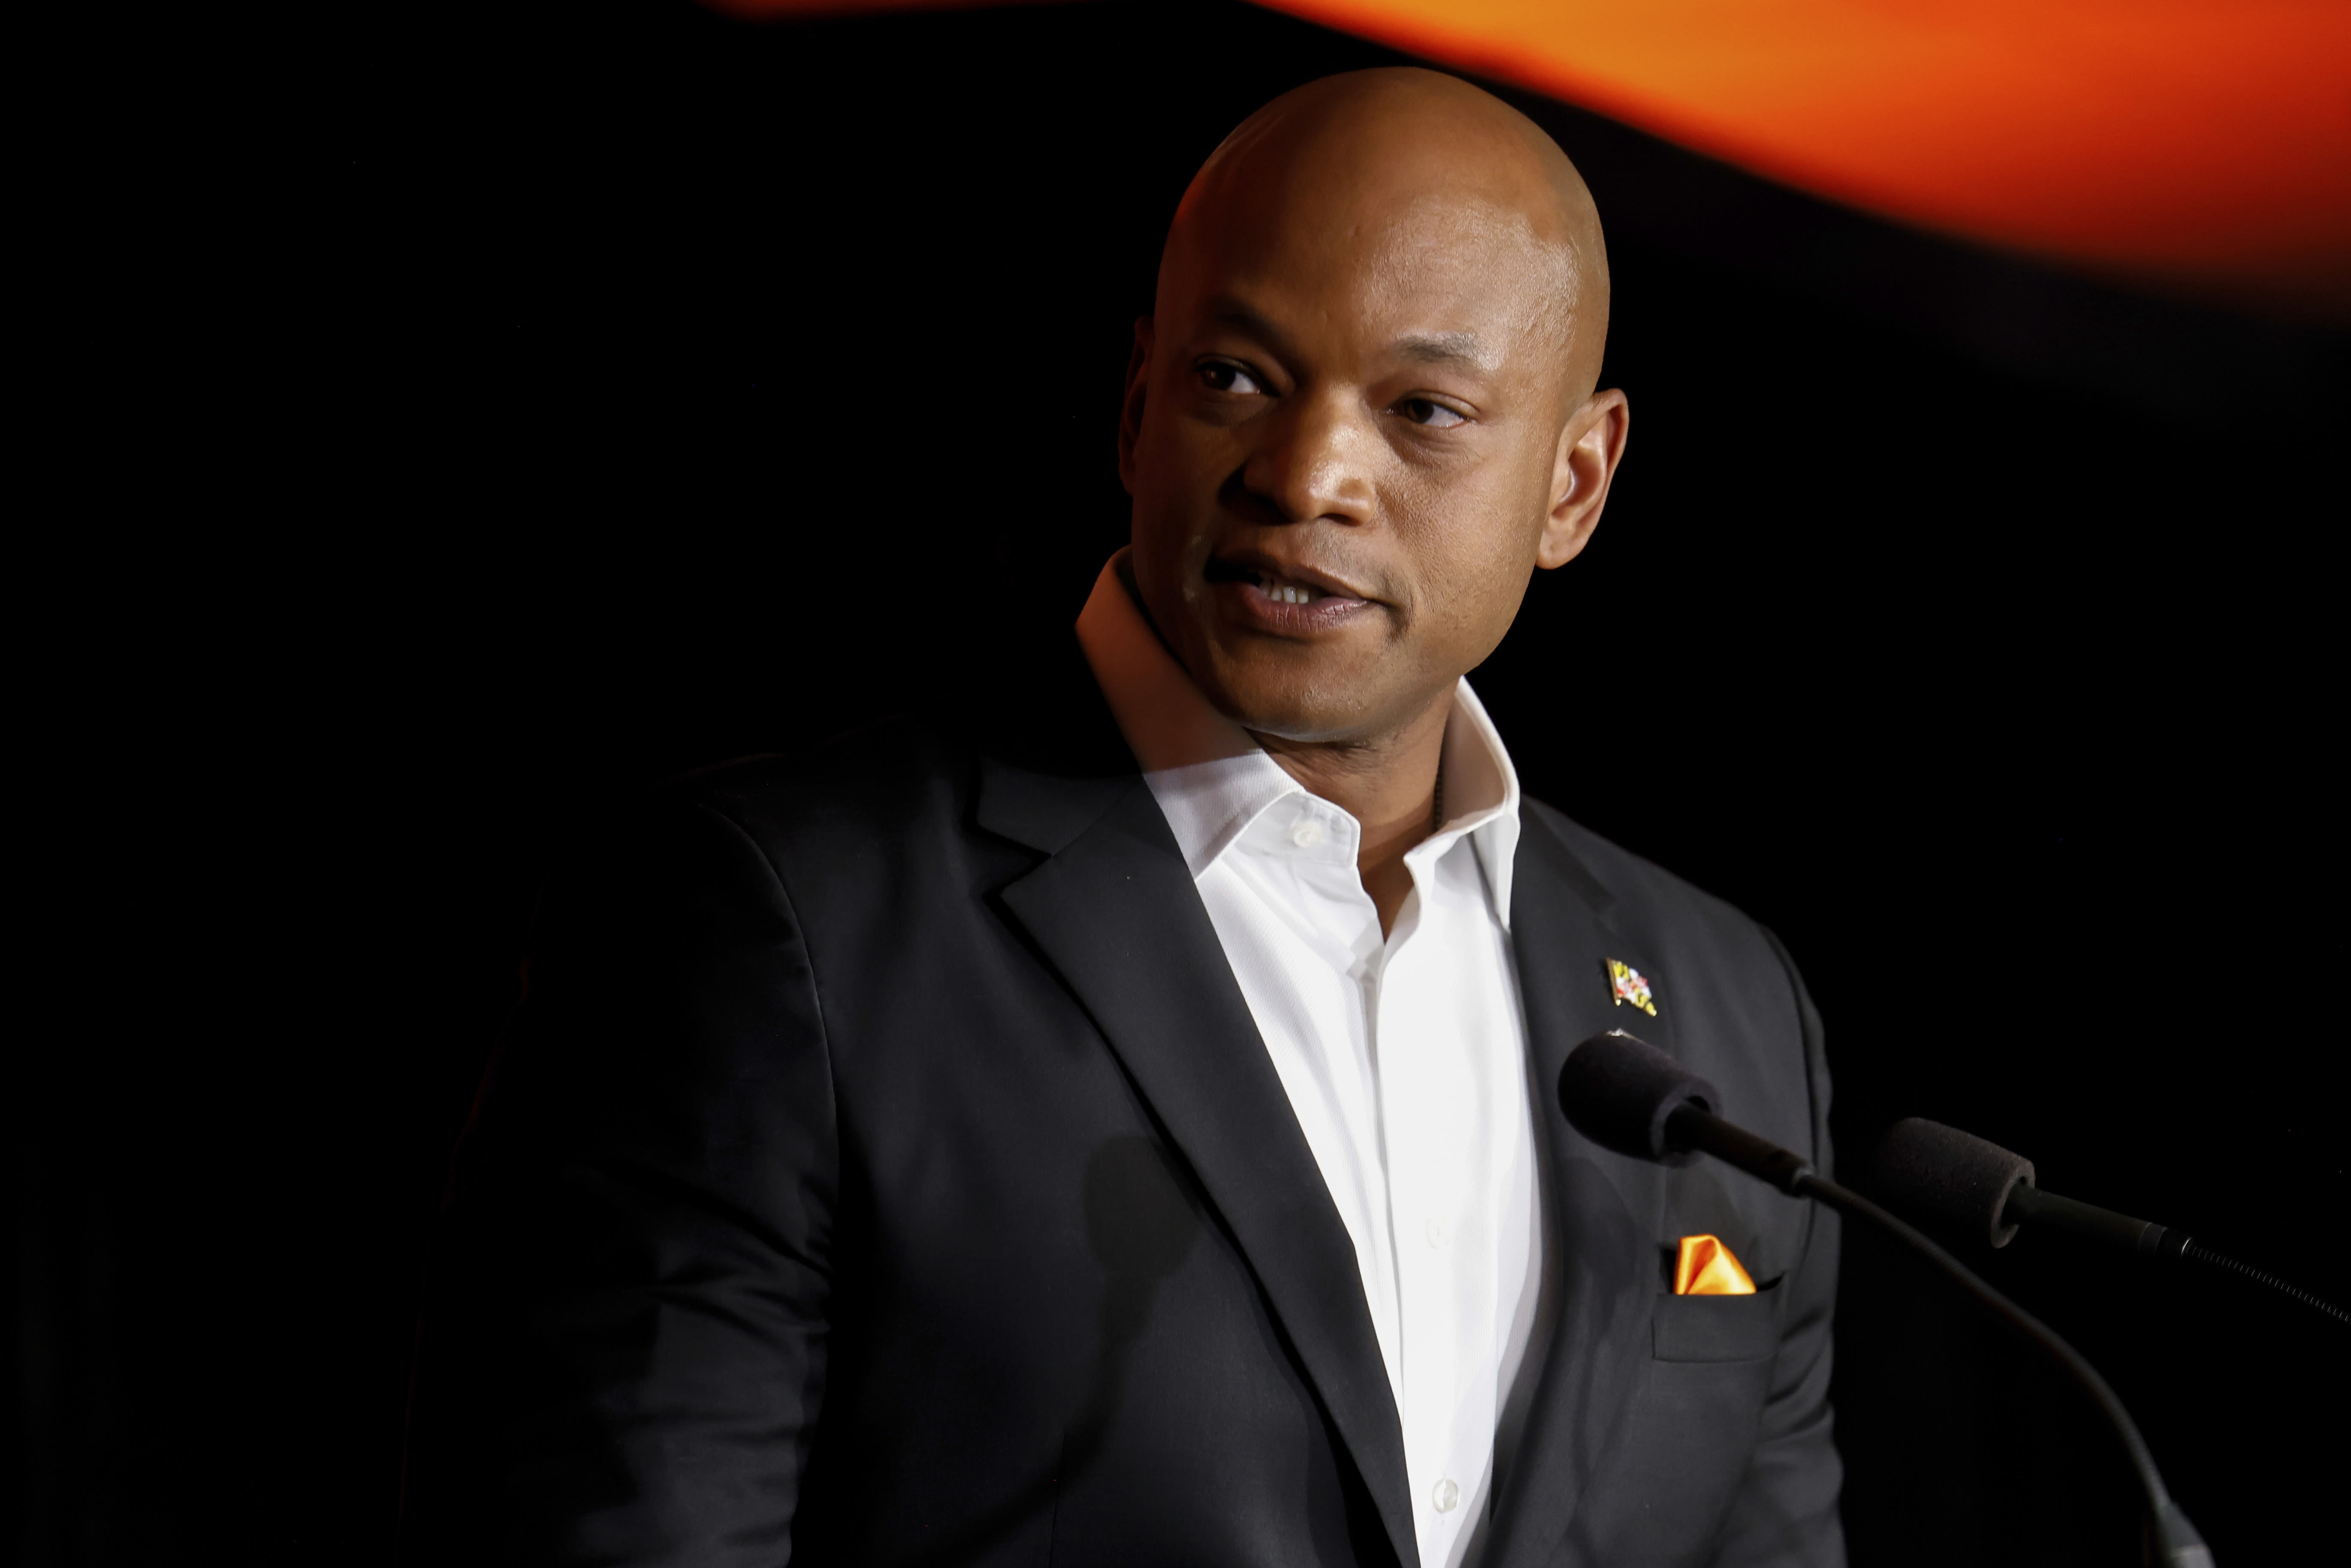 Gov. Wes Moore stakes his reputation on the high-profile Senate race